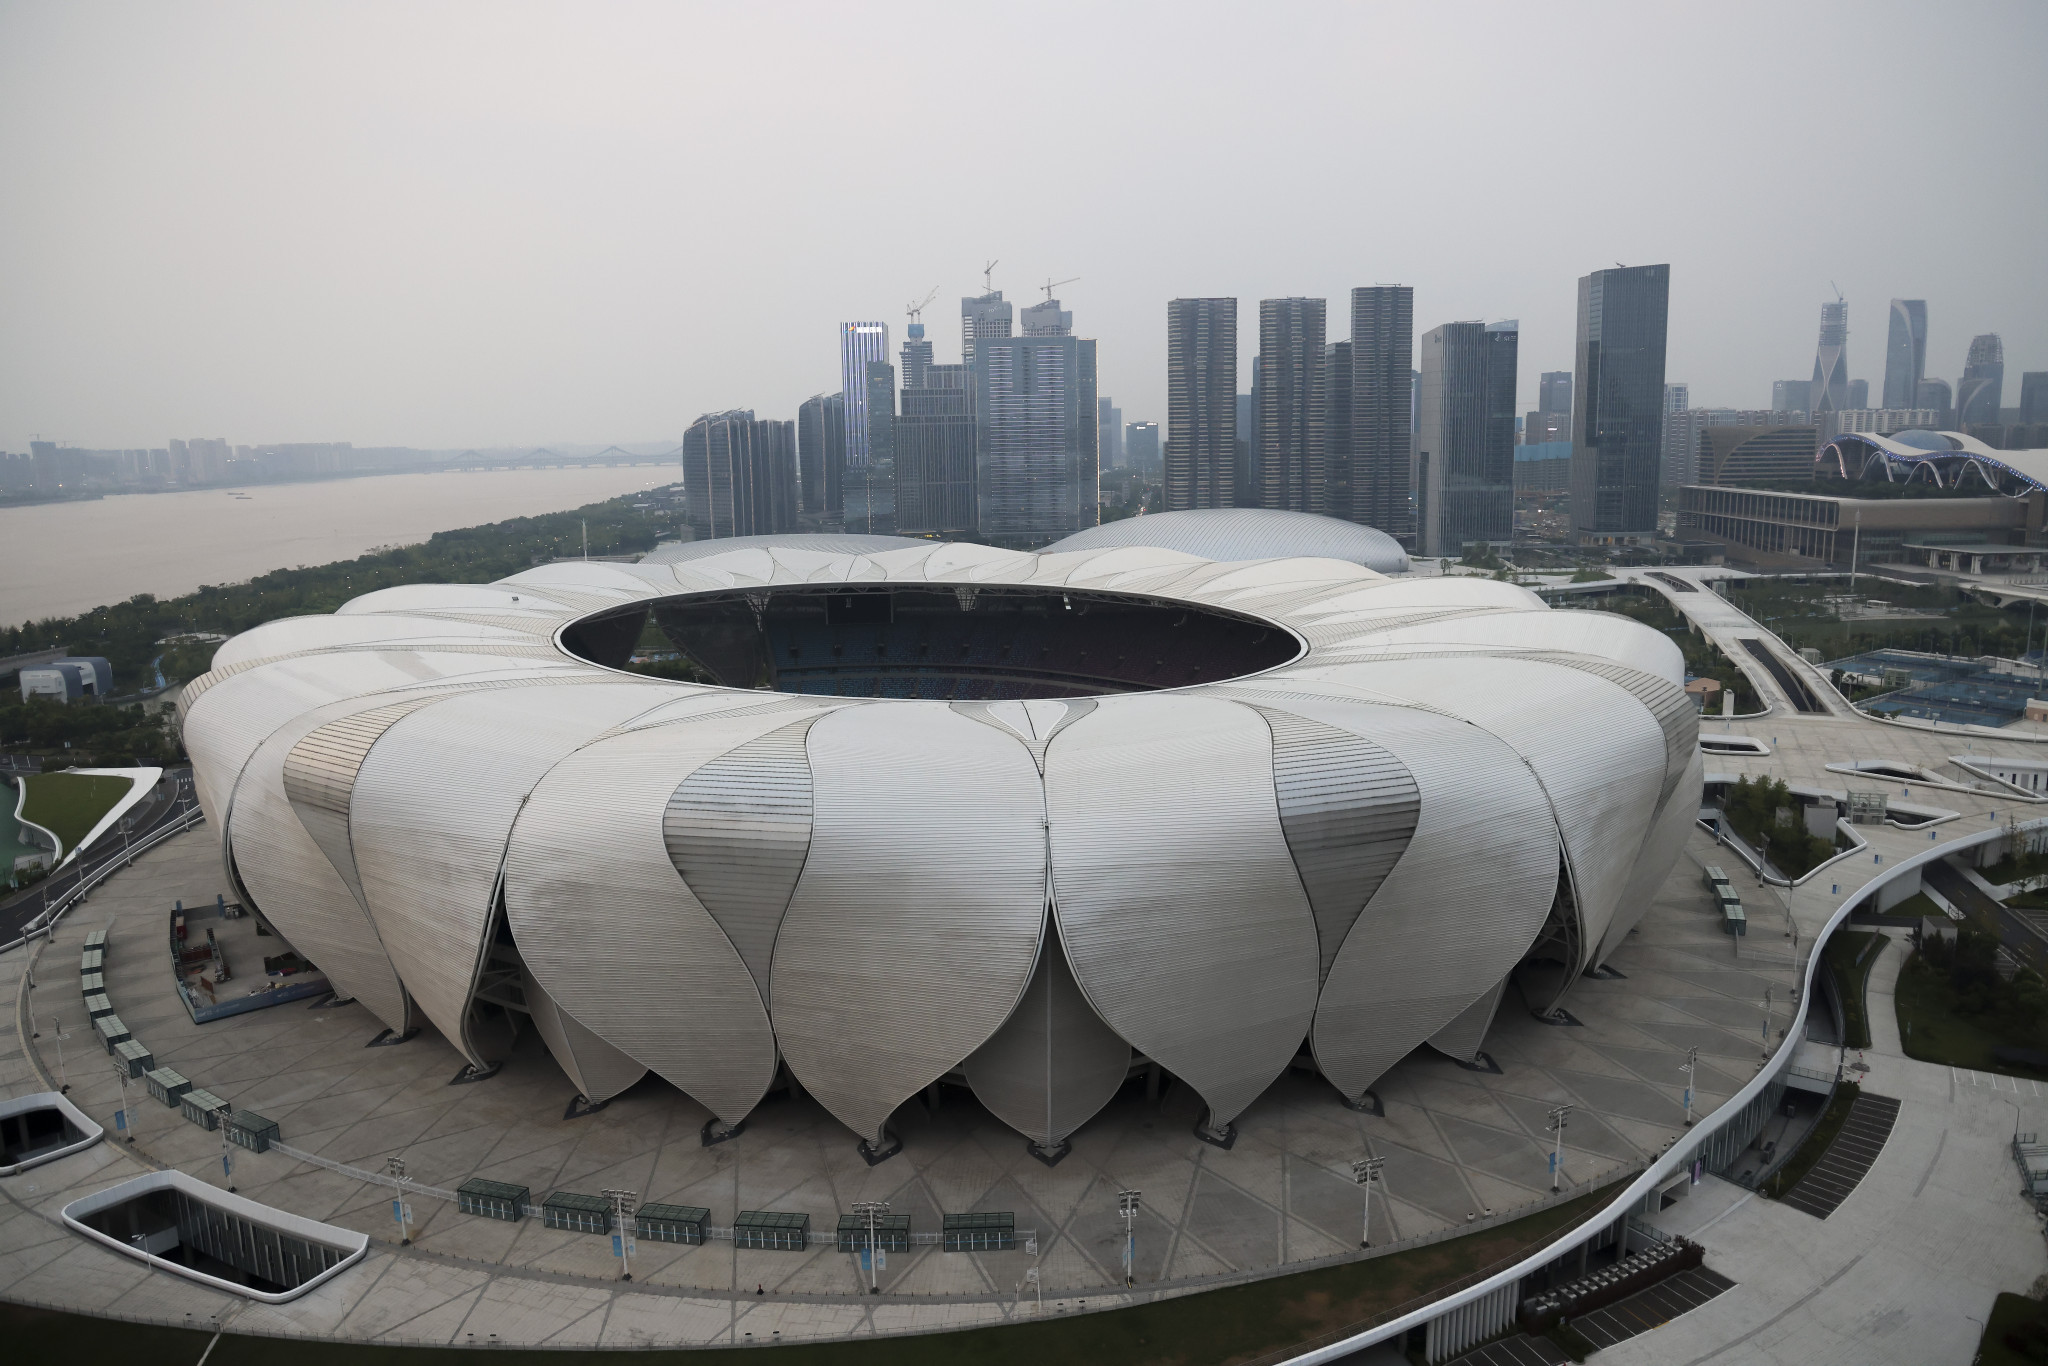 Hangzhou 2022's pre-delegation registration meetings aim to help organisers with operational aspects of preparation ©Getty Images